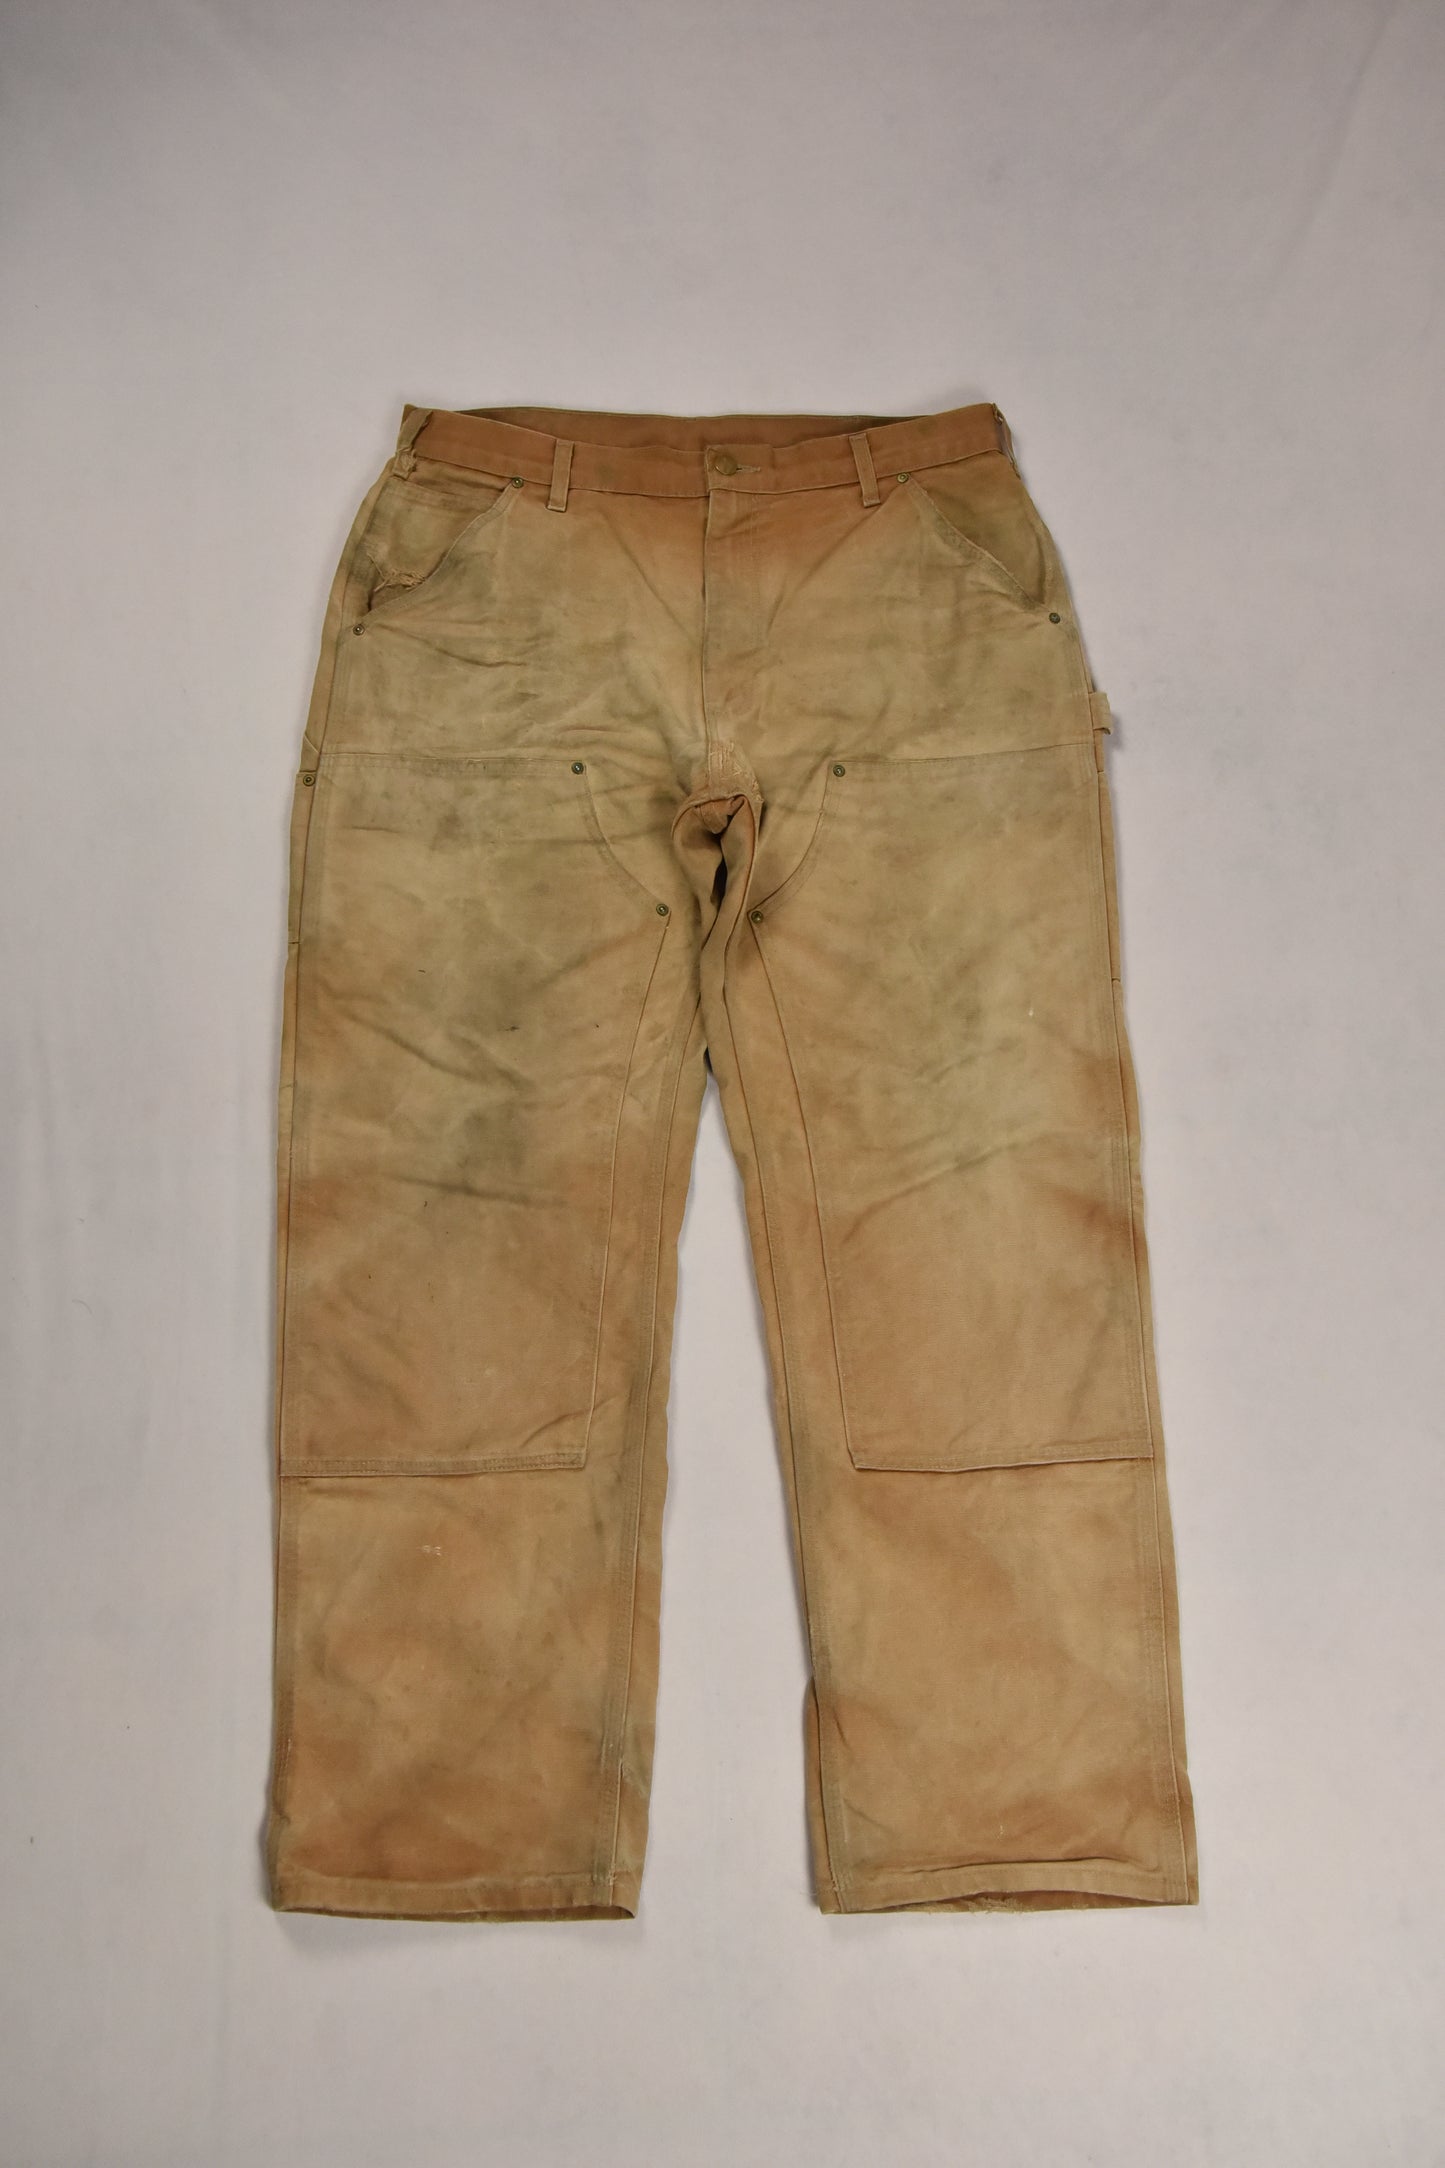 Carhartt Double Knee Workwear Pants Vintage Made in USA / 36x32